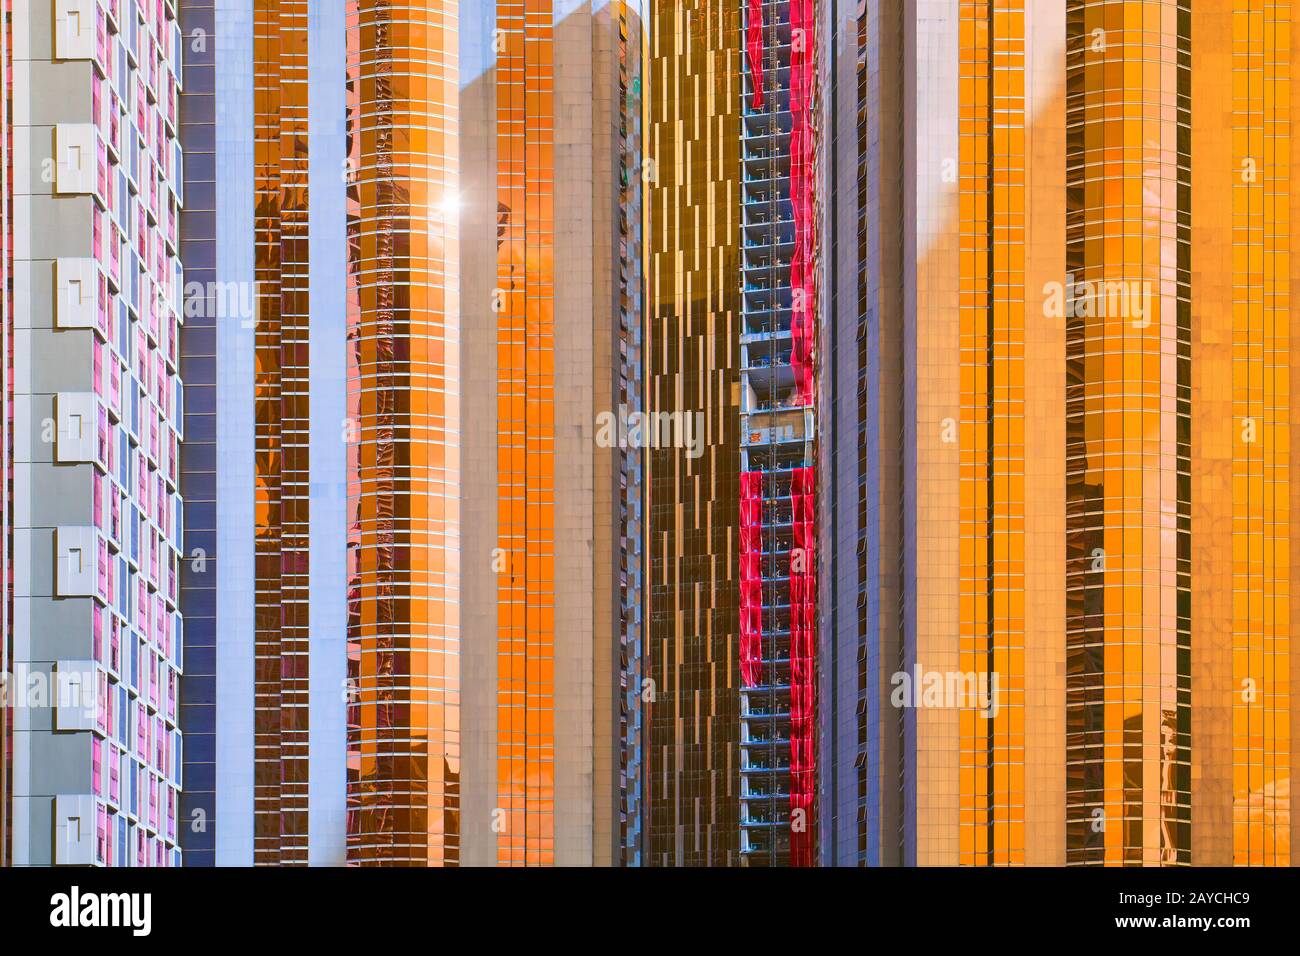 Urban abstract close up view of multiple steel and glass windows facade office building . Stock Photo